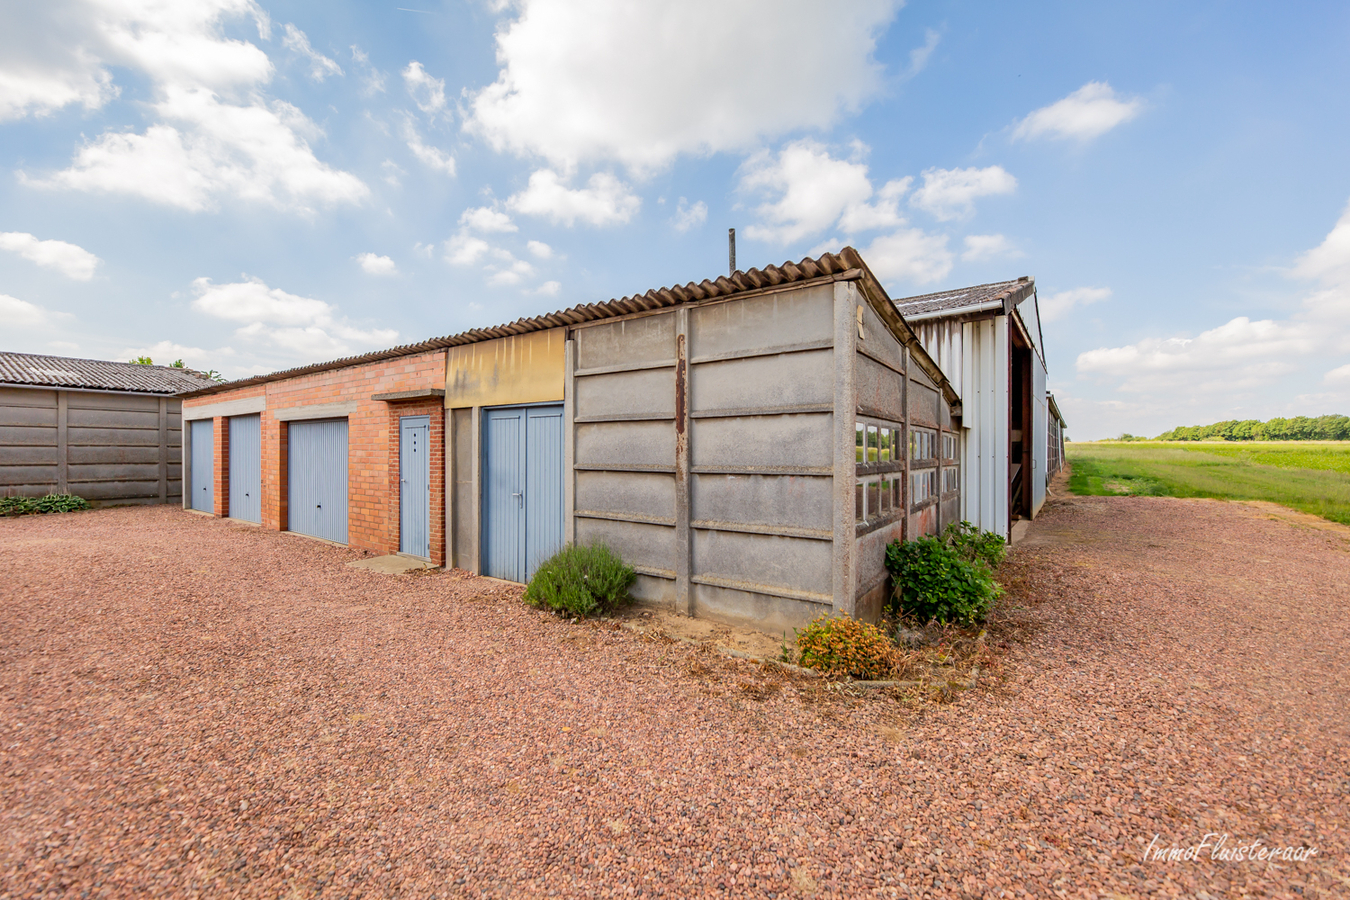 Property for sale |  with option - with restrictions in Gelrode